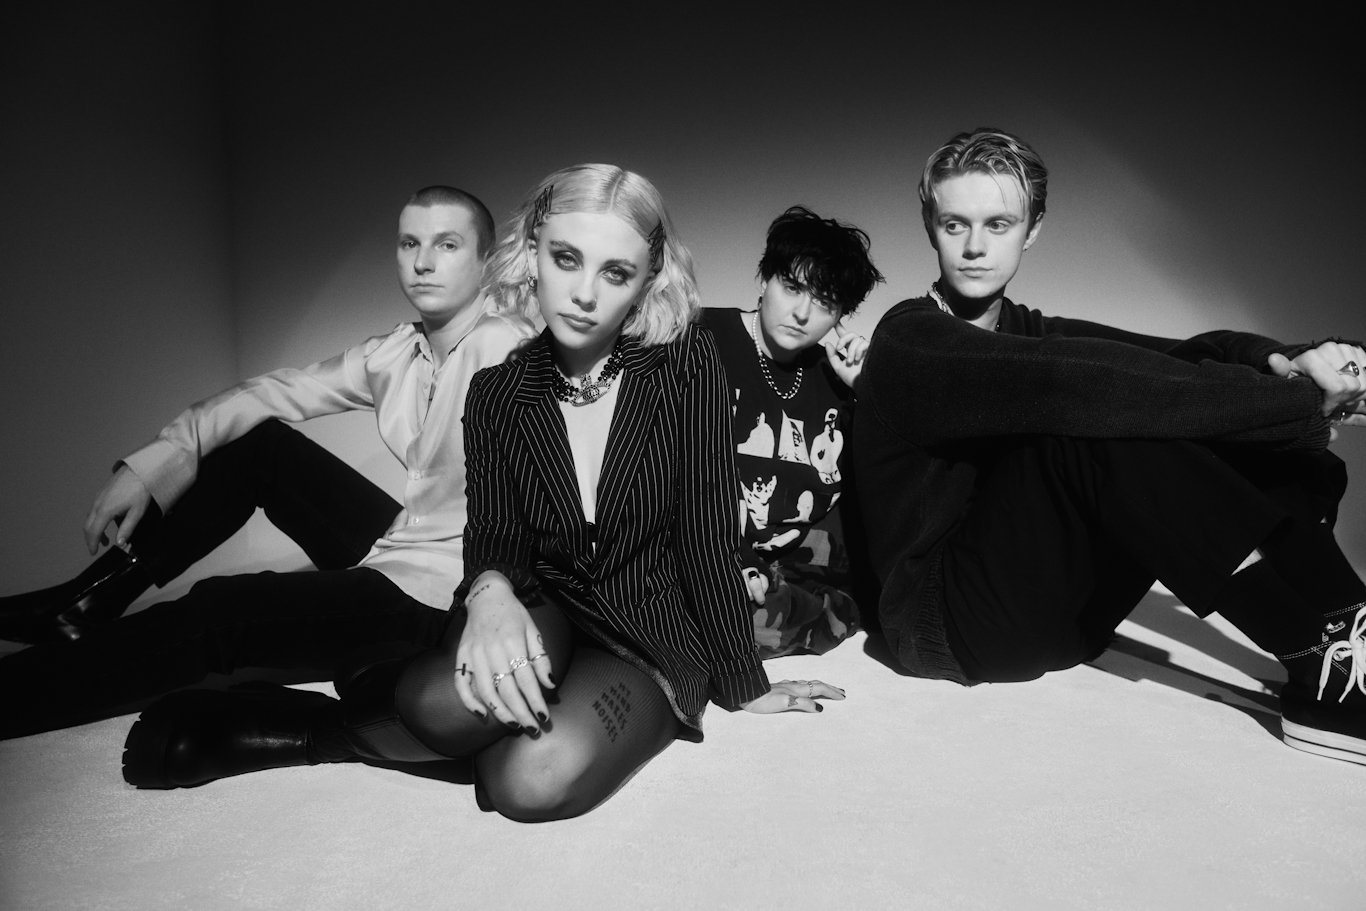 PALE WAVES announce new album 'Unwanted' - Hear new single ‘Lies’ 1